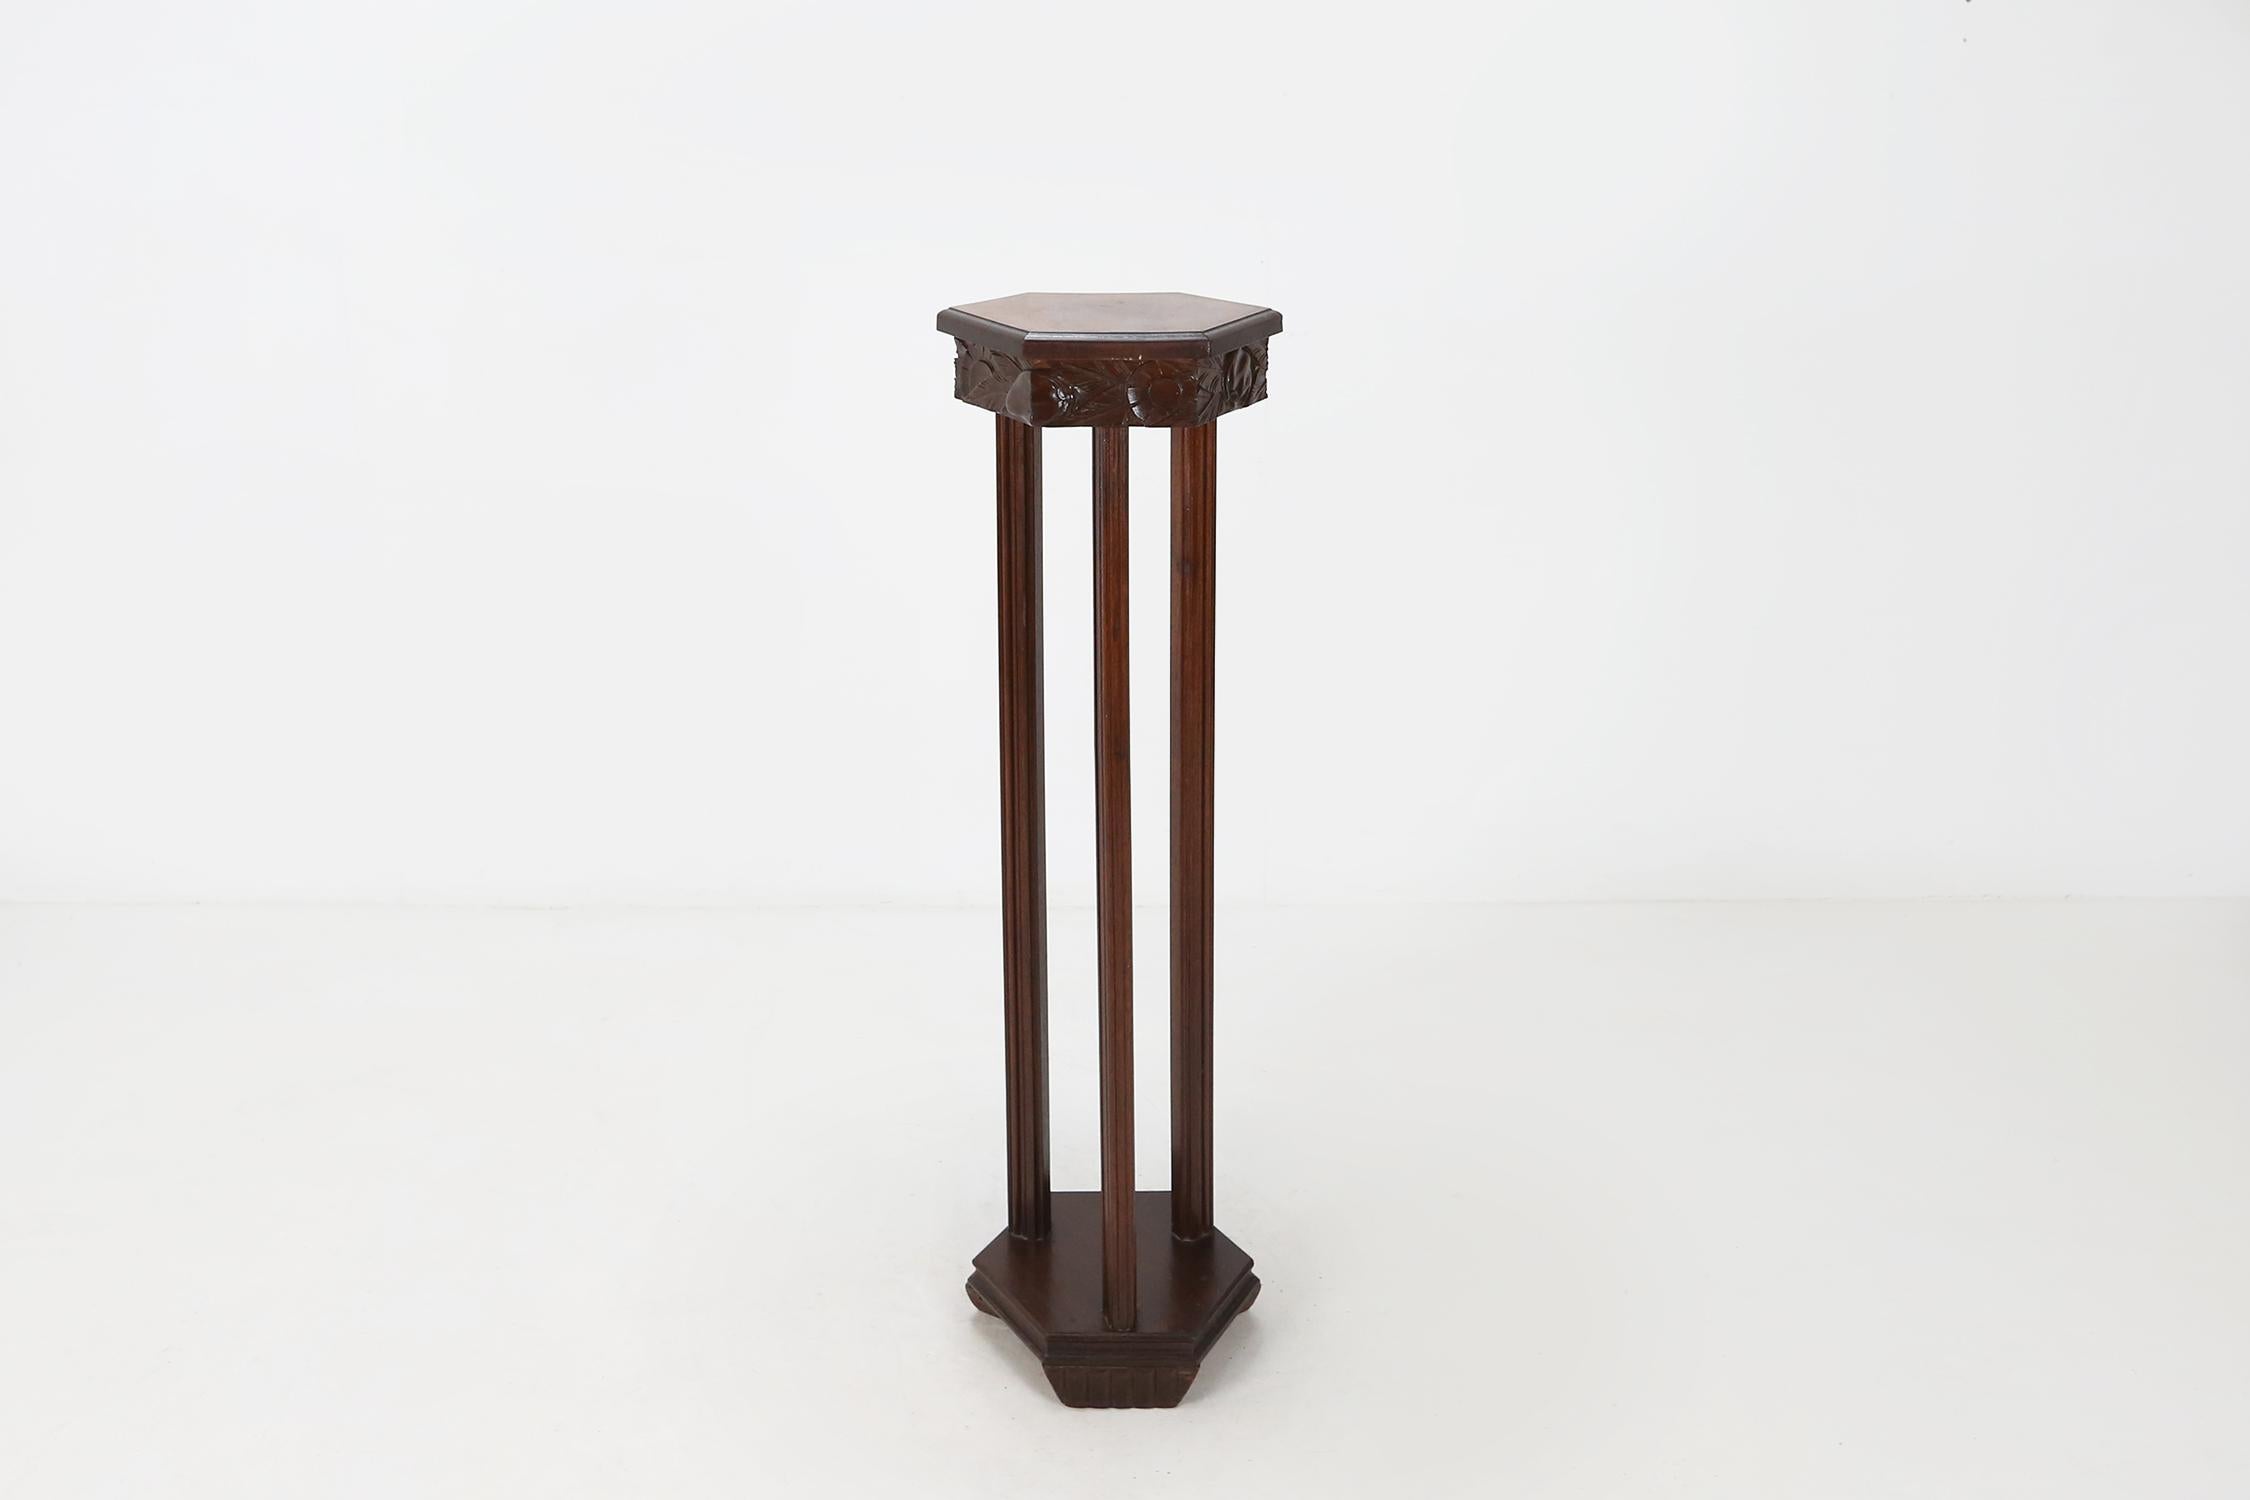 Art Deco pied de stal, console table. made of wood with some nice sculptural detail. Perfect for a vase or flowers.